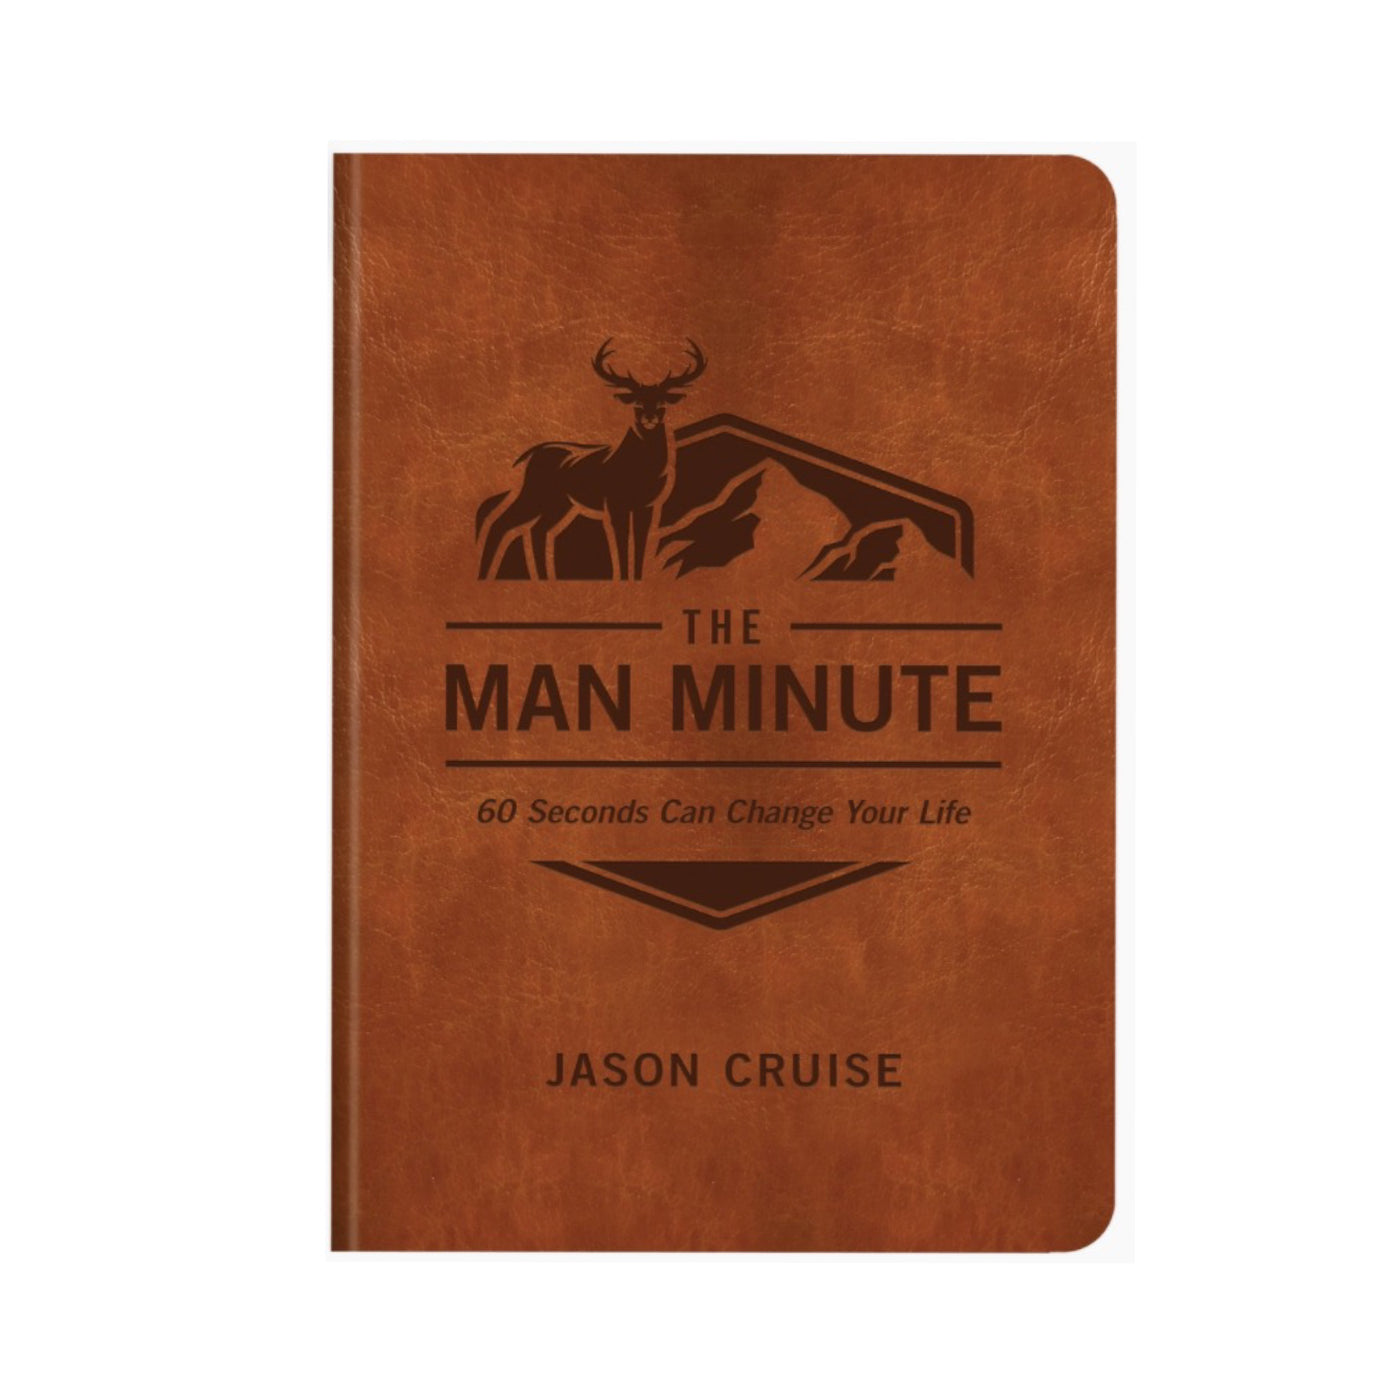 The Man Minute: 60 Seconds Can Change Your Life